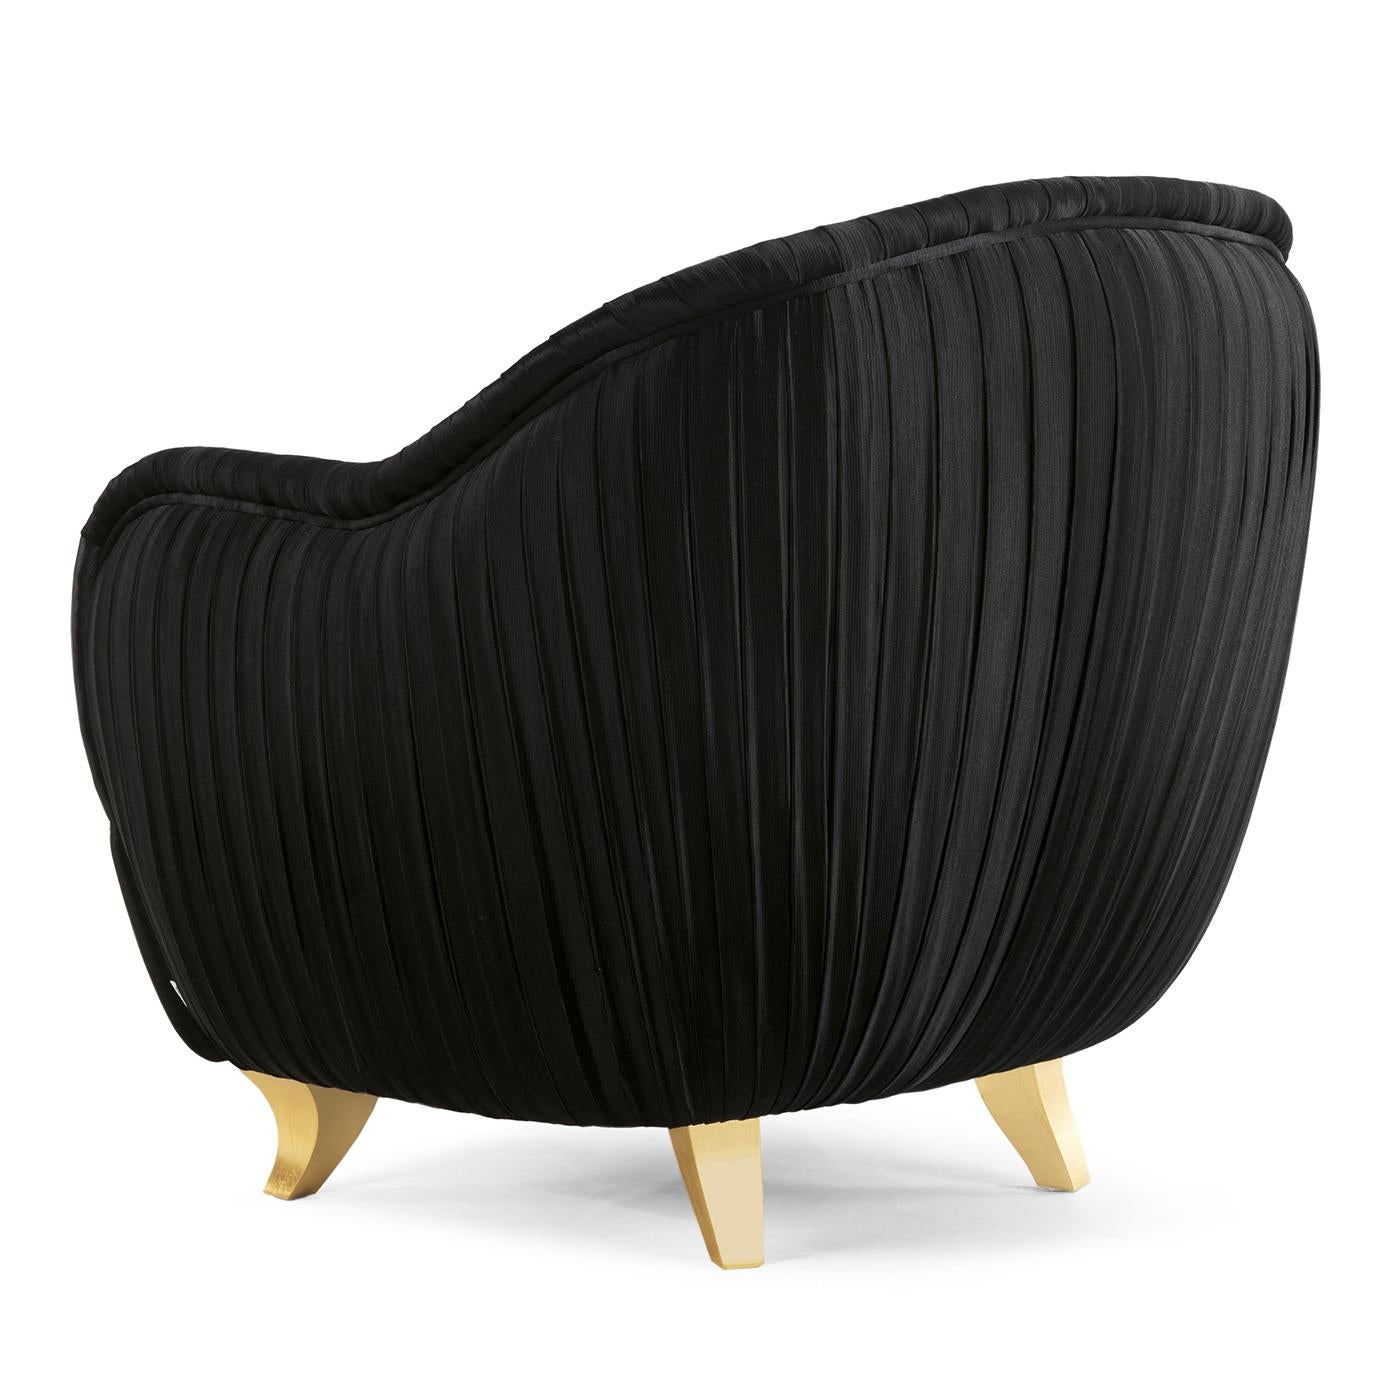 A stunning piece of functional decor, this armchair combines comfort with an elegant design and features an exquisite upholstery in fabric that was pleated by hand throughout, making it ideal to be displayed also in the center of a room. Its frame